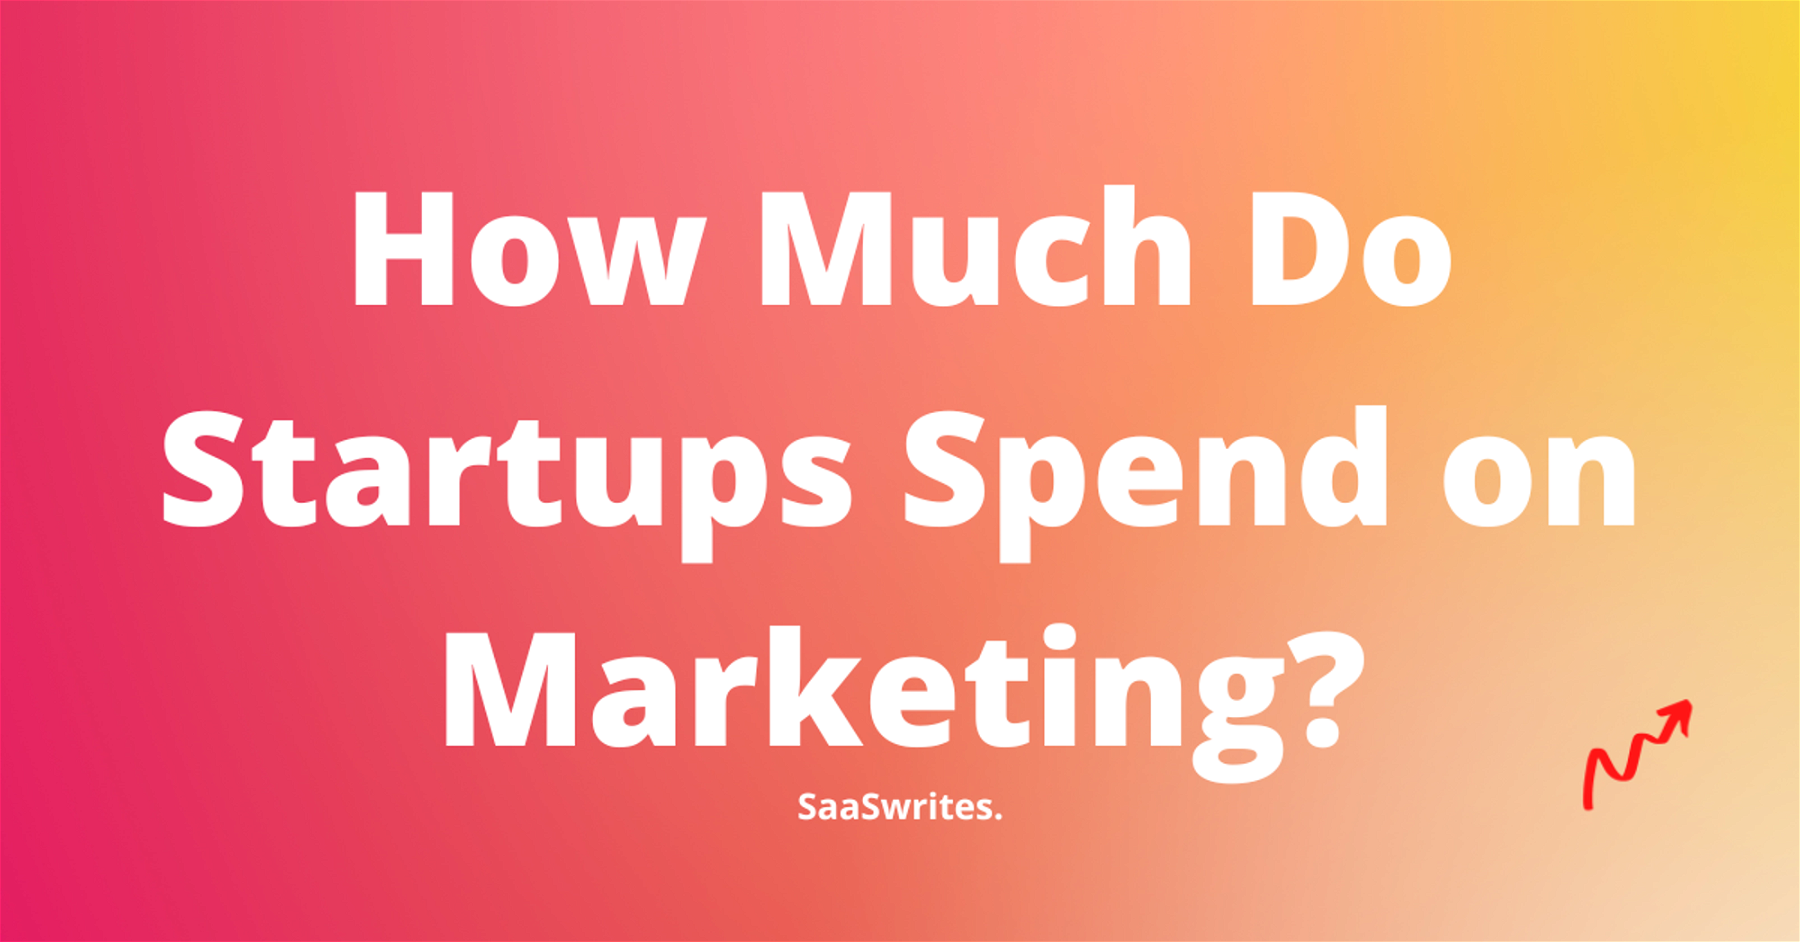 How Much Do Startups Spend on Marketing?